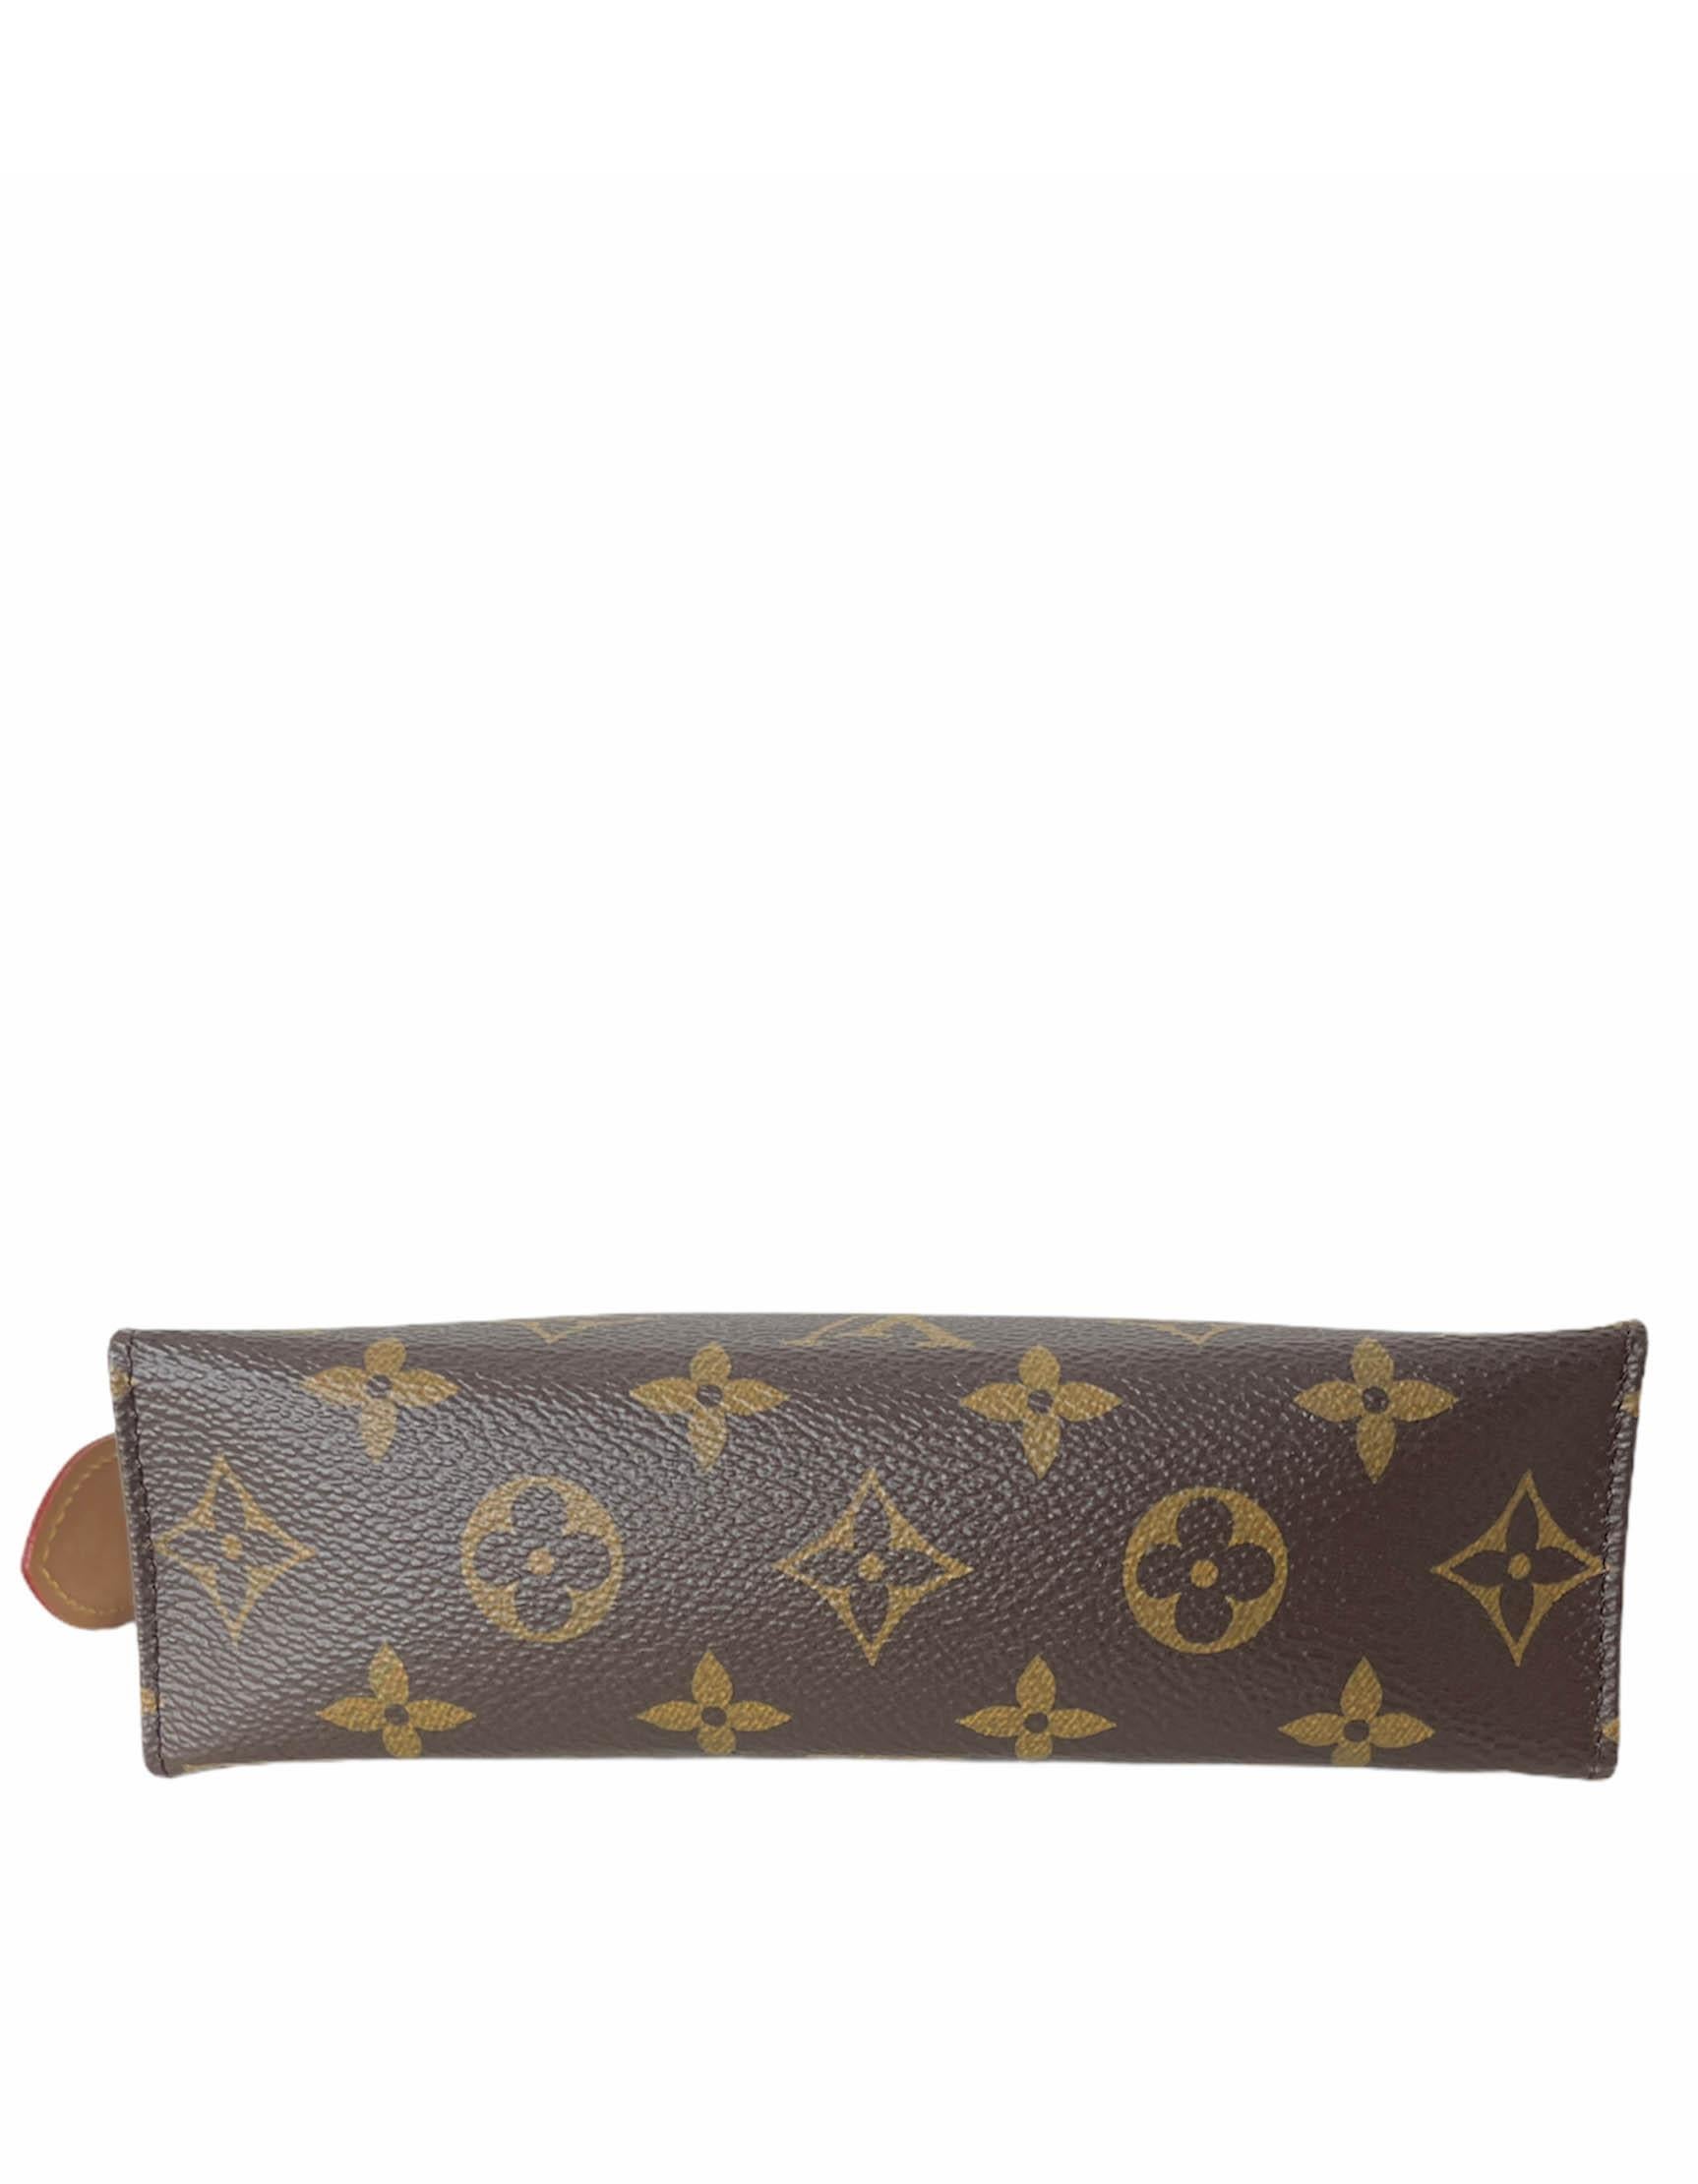 louis vuitton toiletry pouch discontinued